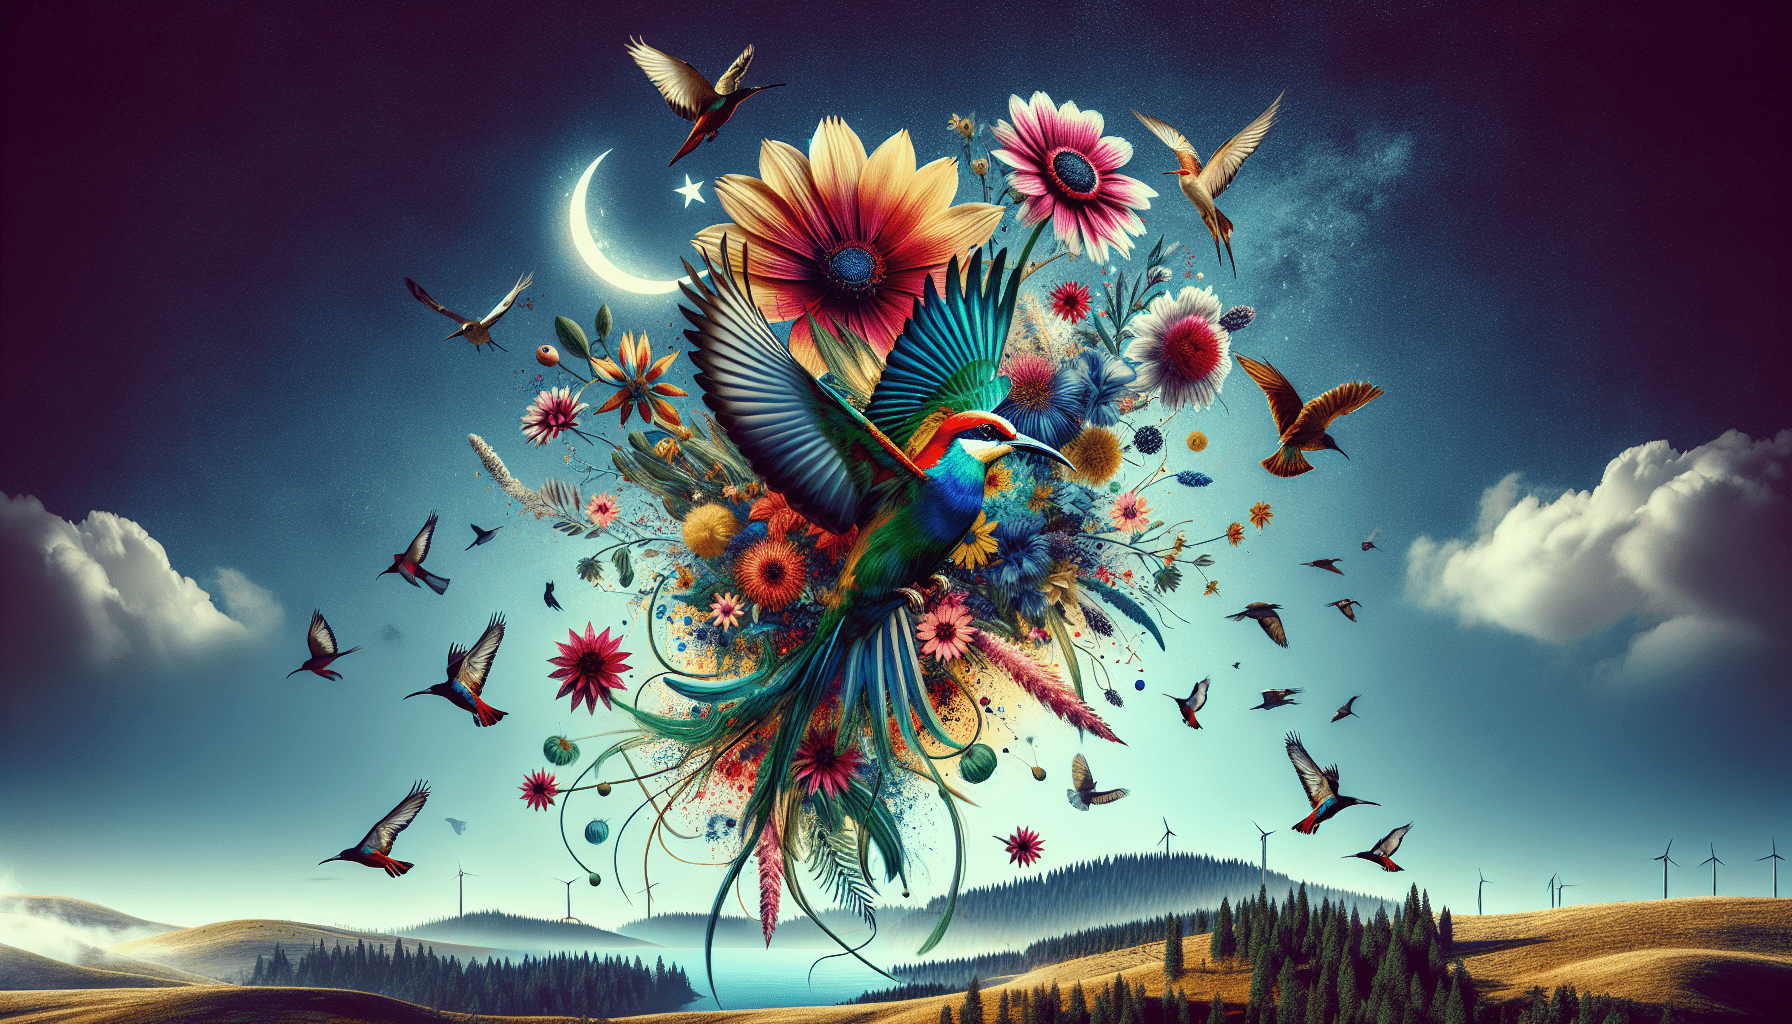 A colorful parrot with outstretched wings is surrounded by vibrant flowers and various birds in flight, set against a background featuring a crescent moon, rolling hills reminiscent of Turkish landscapes, and wind turbines.